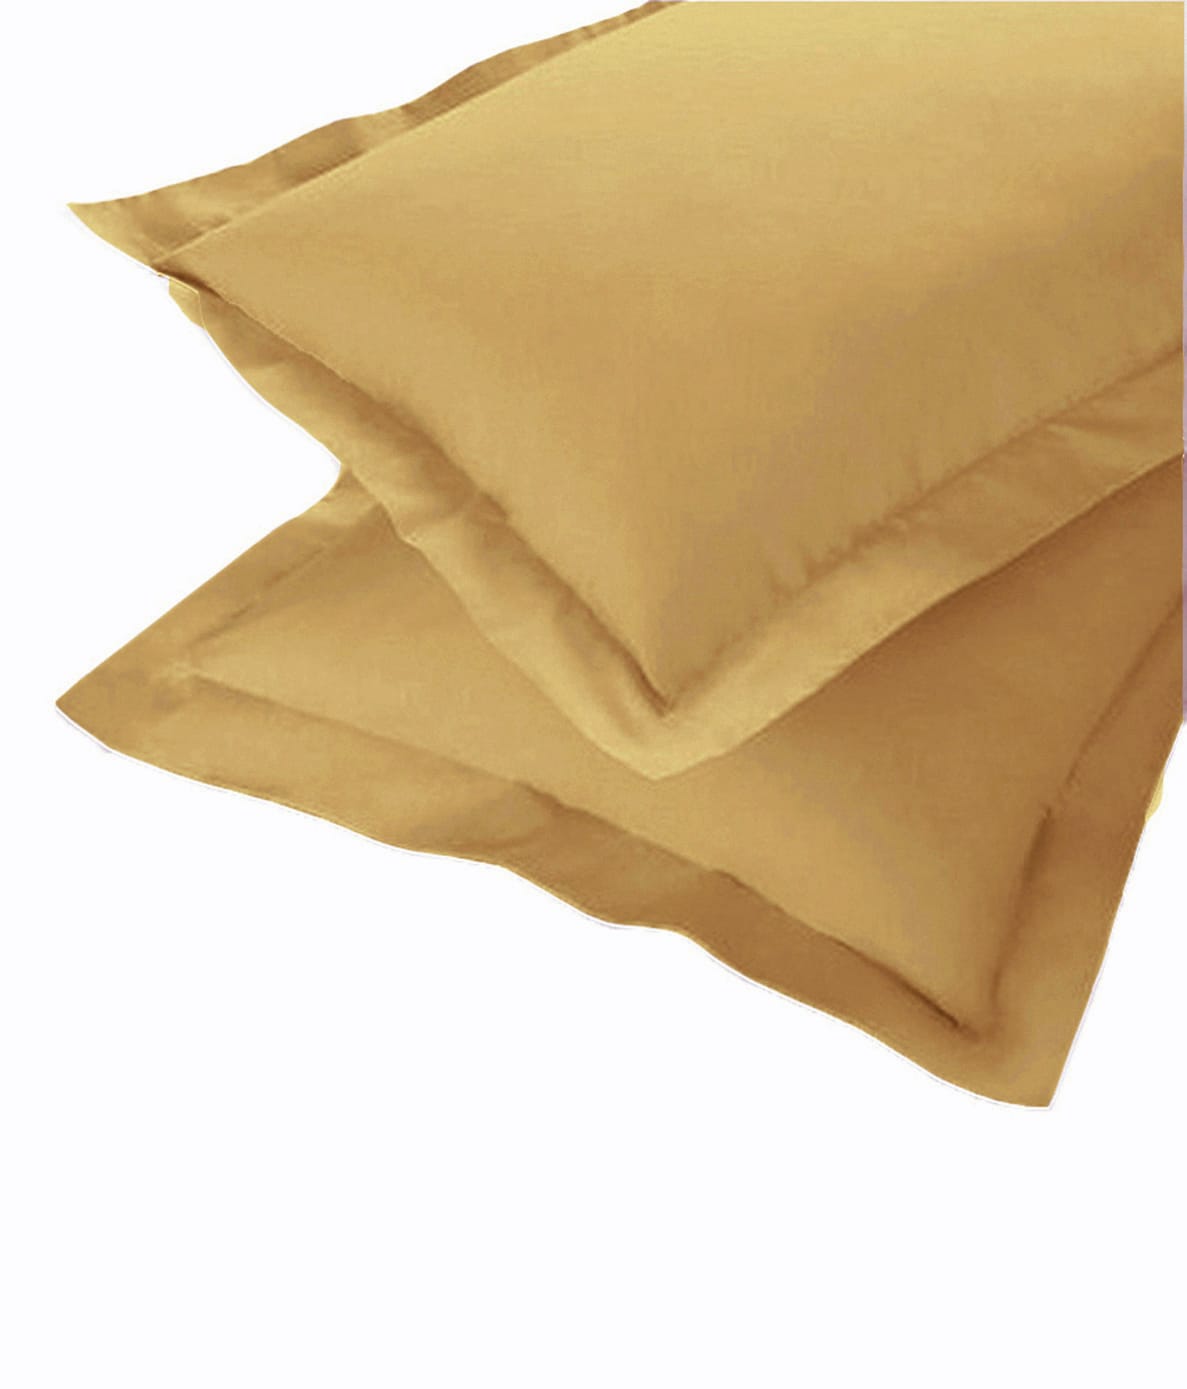 Soft 210 TC Plain Cotton Pillow Cover Set In Camel Brown Online In India(2 Pcs)